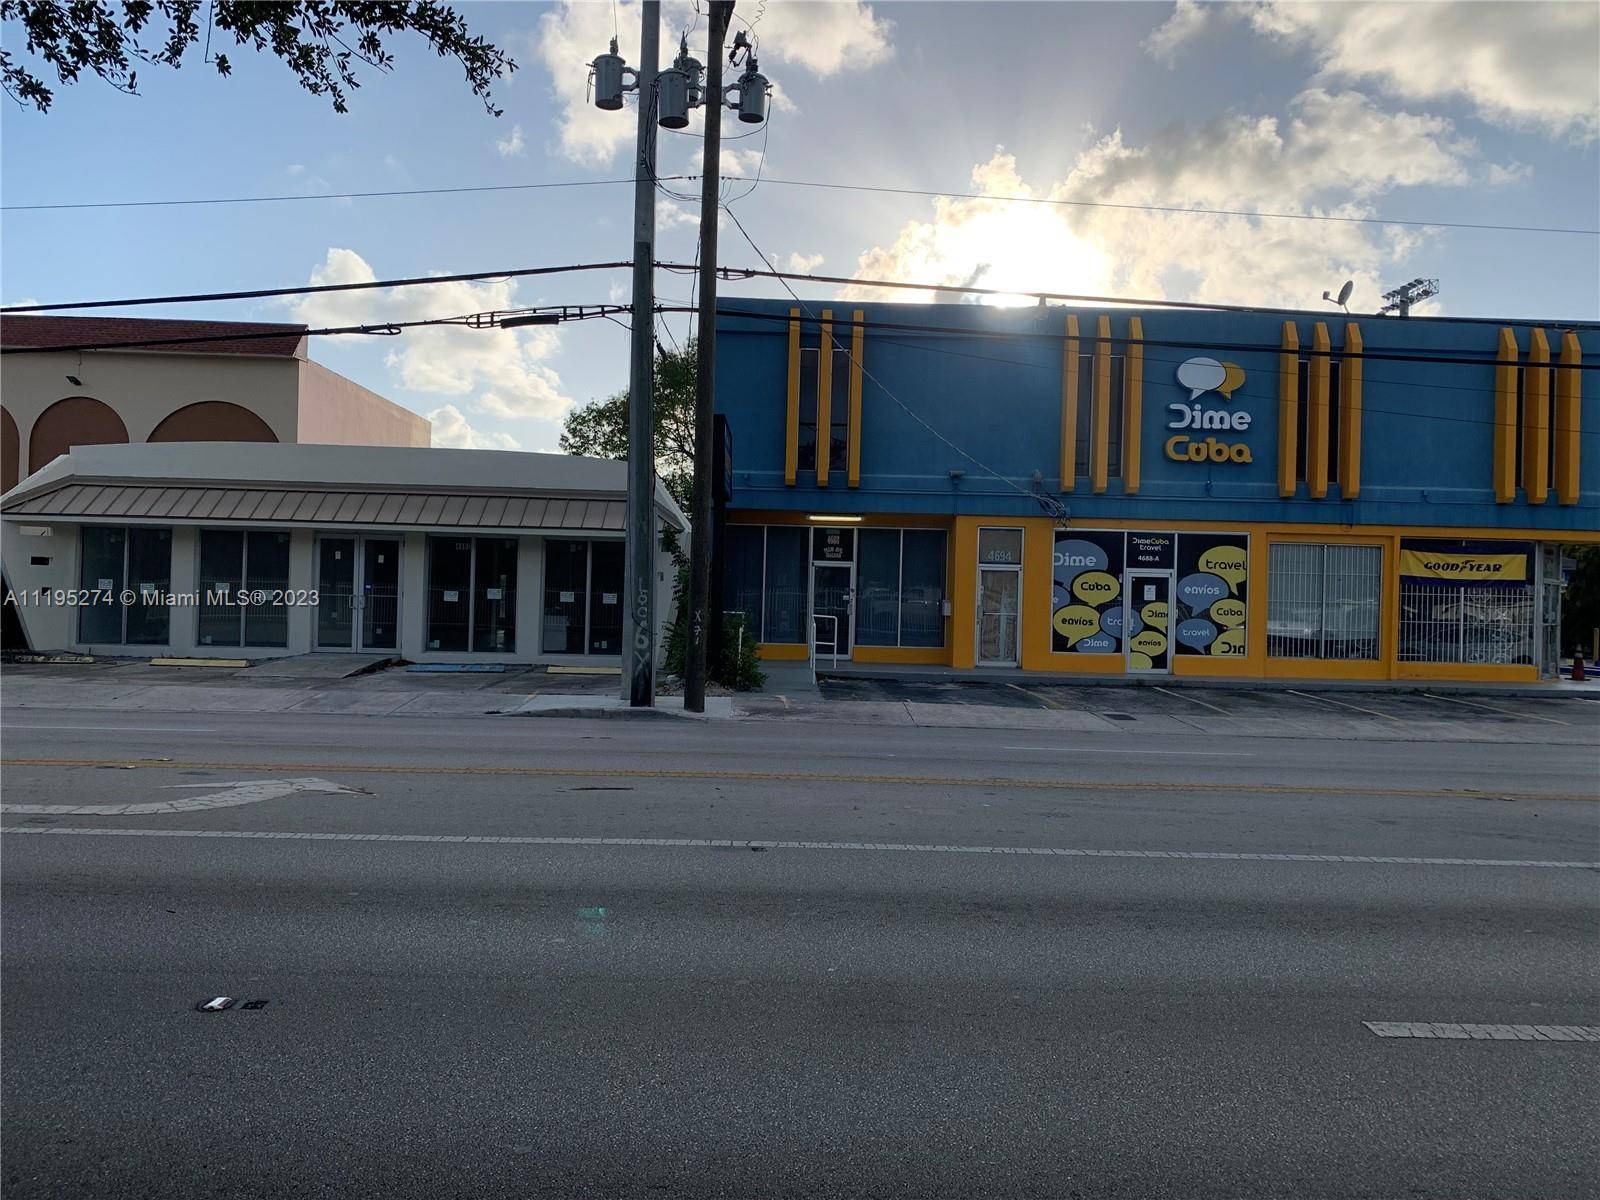 Excellent investment opportunity in downtown Hialeah with Primary Land Use 1229 MIXED USE STORE RESIDENTIAL MIXED USE COMMERCIAL, lot of 20, 000 sqft.